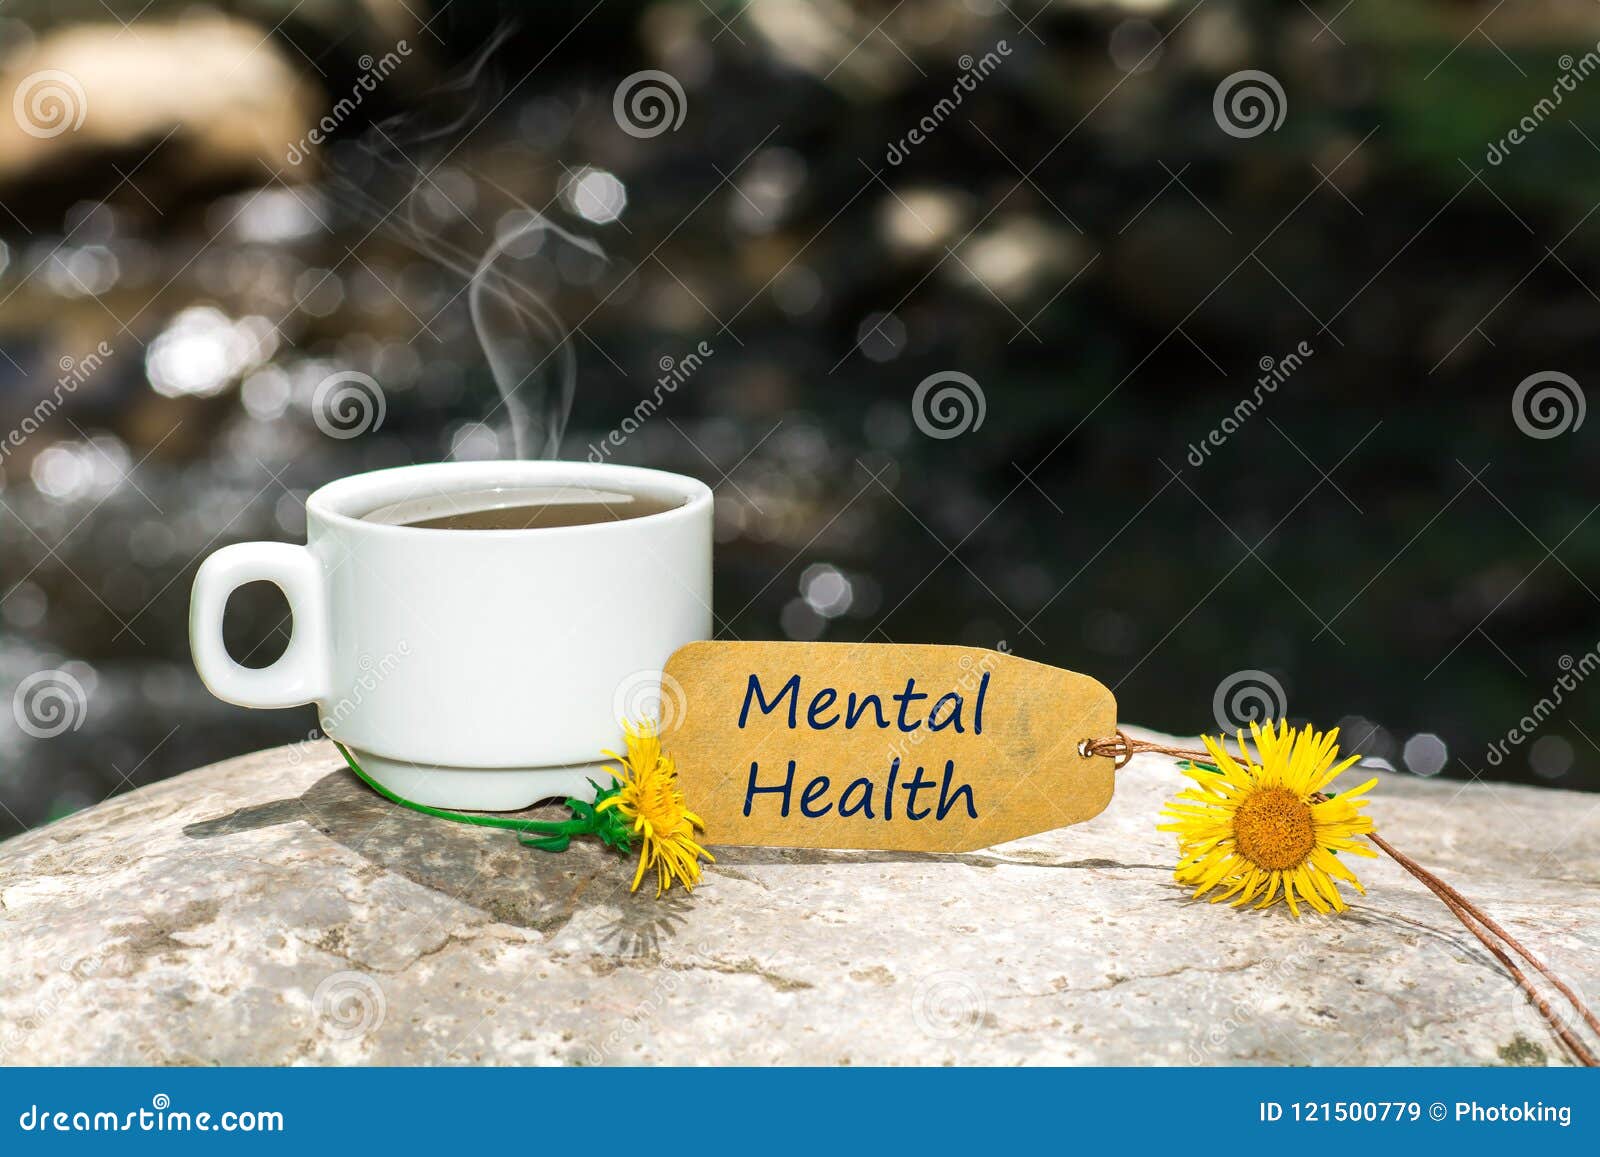 mental health text with coffee cup